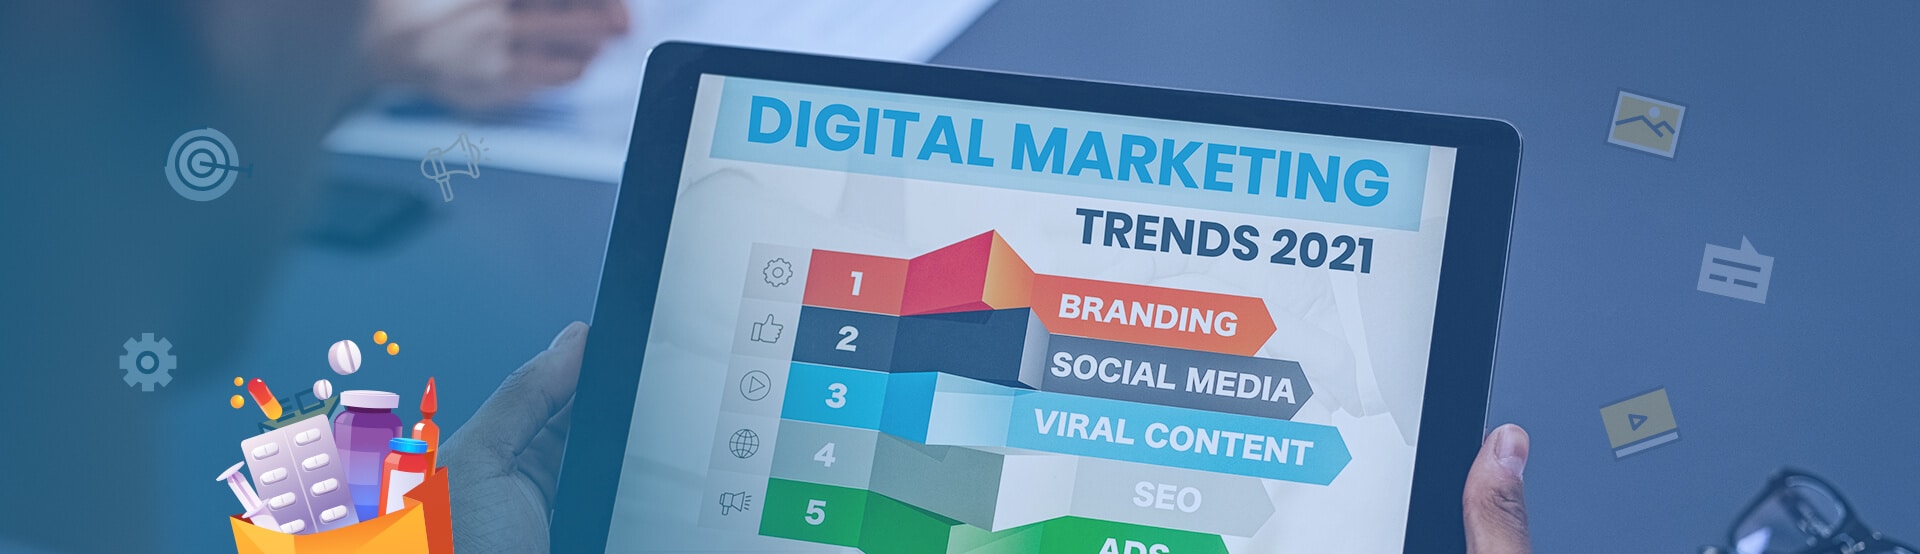 The Visible rank Digital-Marketing-Trends-2021